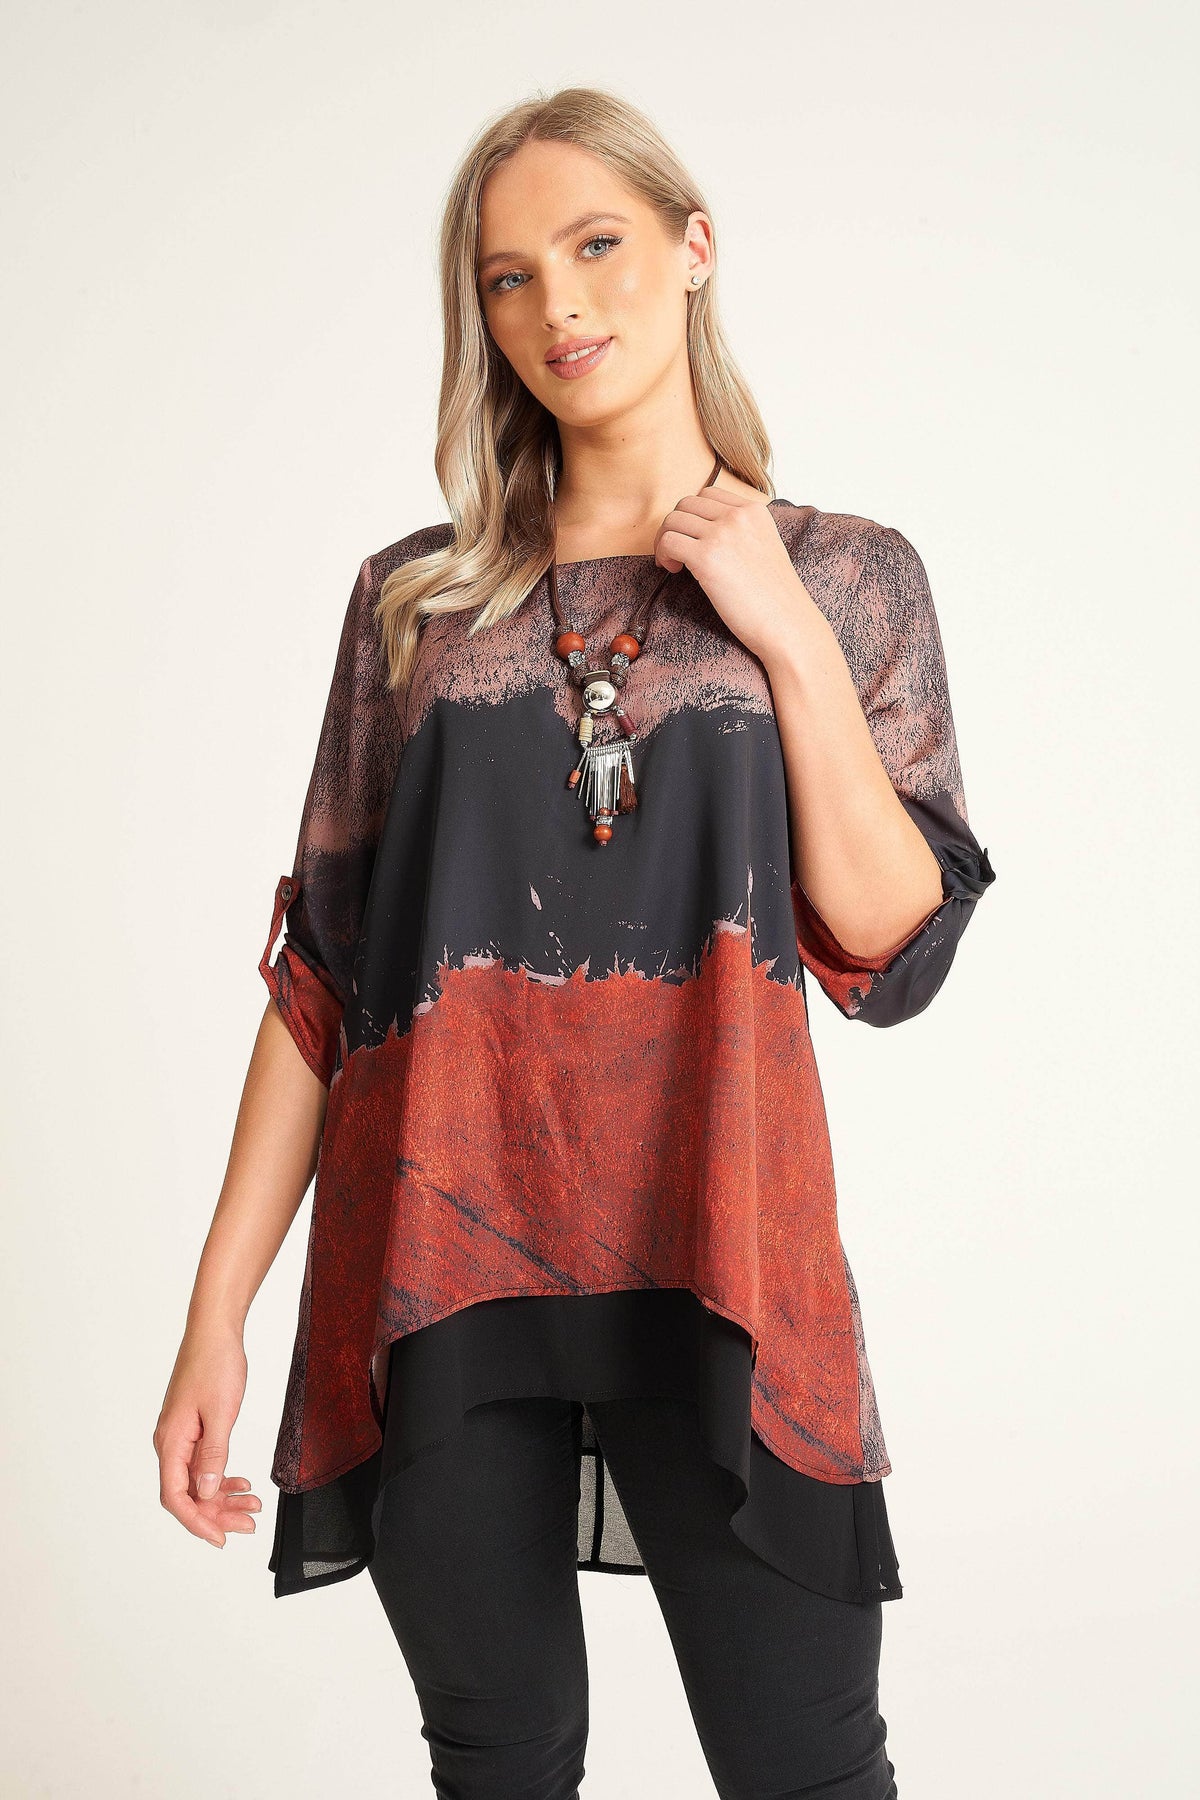 Saloos Silk-Look Tie-Dye Elliptical Tunic Top with Necklace